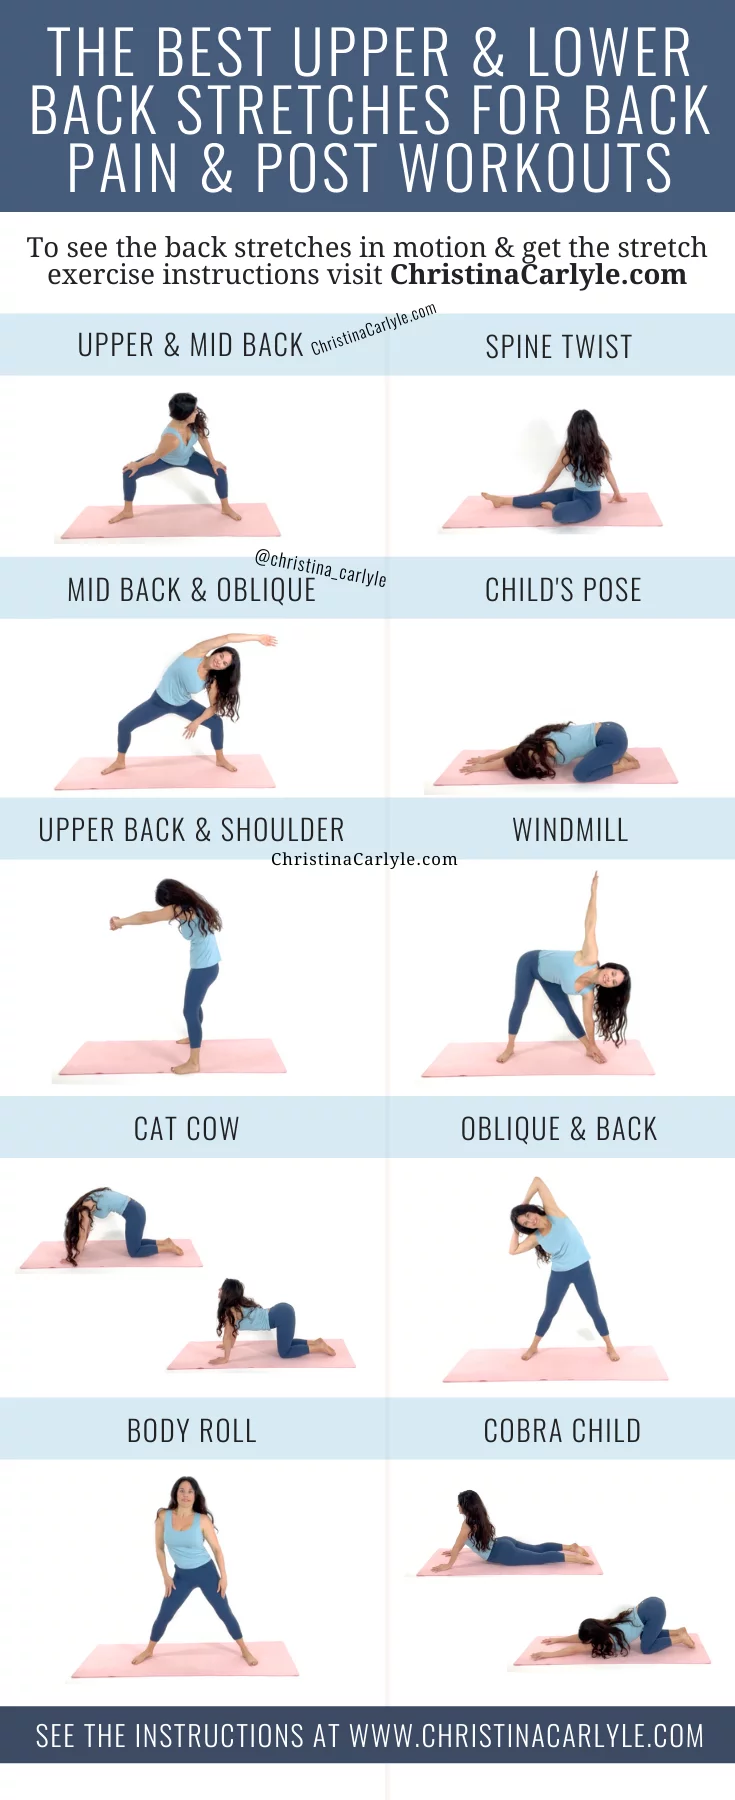 trainer Christina Carlyle demonstrating 10 back exercises and text that says The Best Upper & Lower Back Stretches For Back Pain & Post Workouts